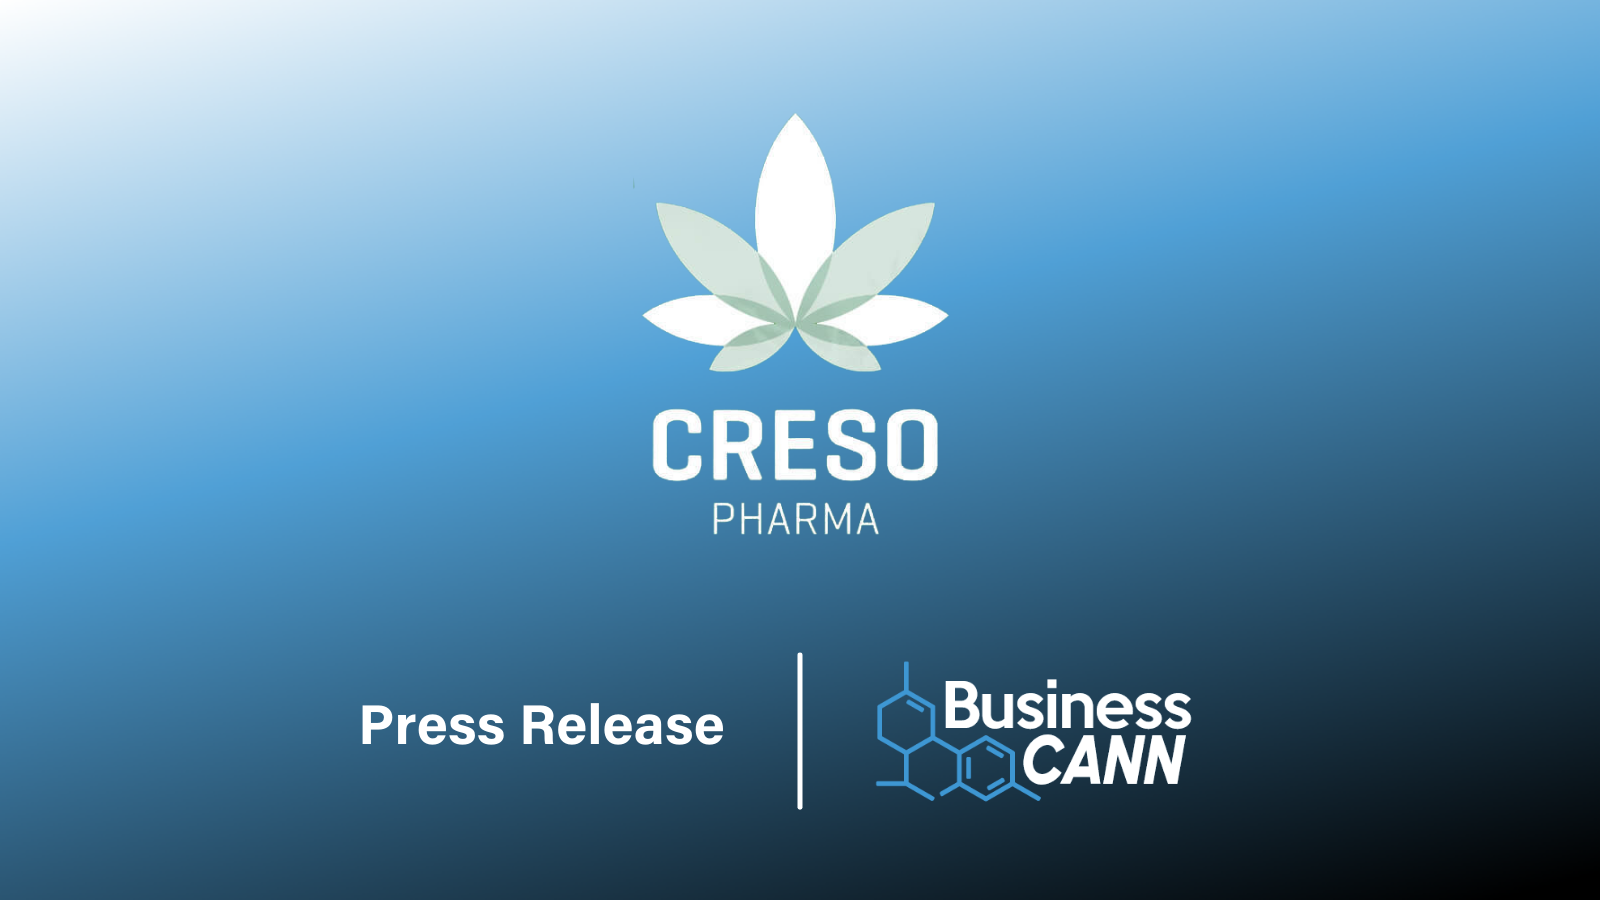 HEALTH House International is pleased to announce that it has entered into a non-binding term sheet with Creso Pharma Limited (ASX: CPH) (Creso), under which it is proposed that Creso will acquire 100% of the shares in Health House by way of a scheme of arrangement to be undertaken by Health House (Scheme).